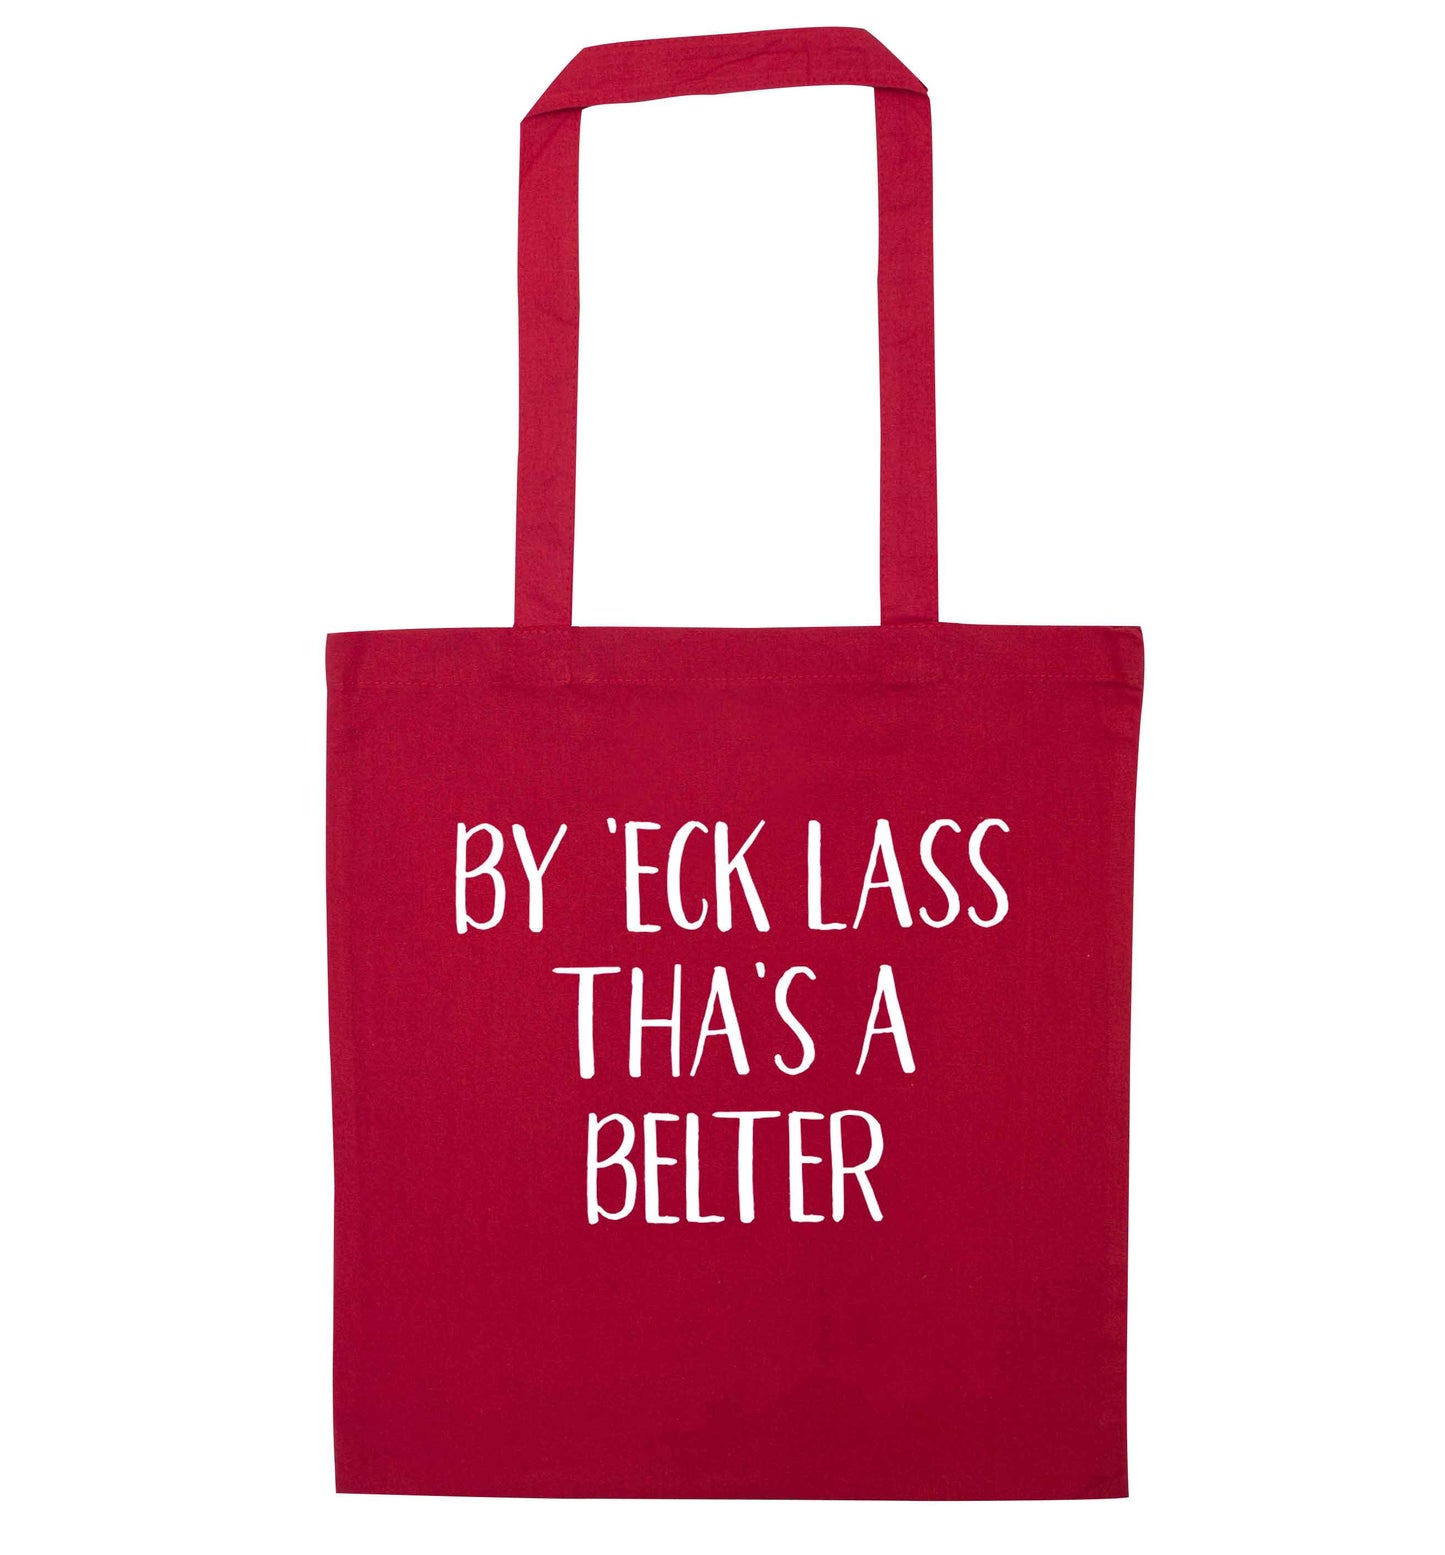 Be 'eck lass tha's a belter red tote bag